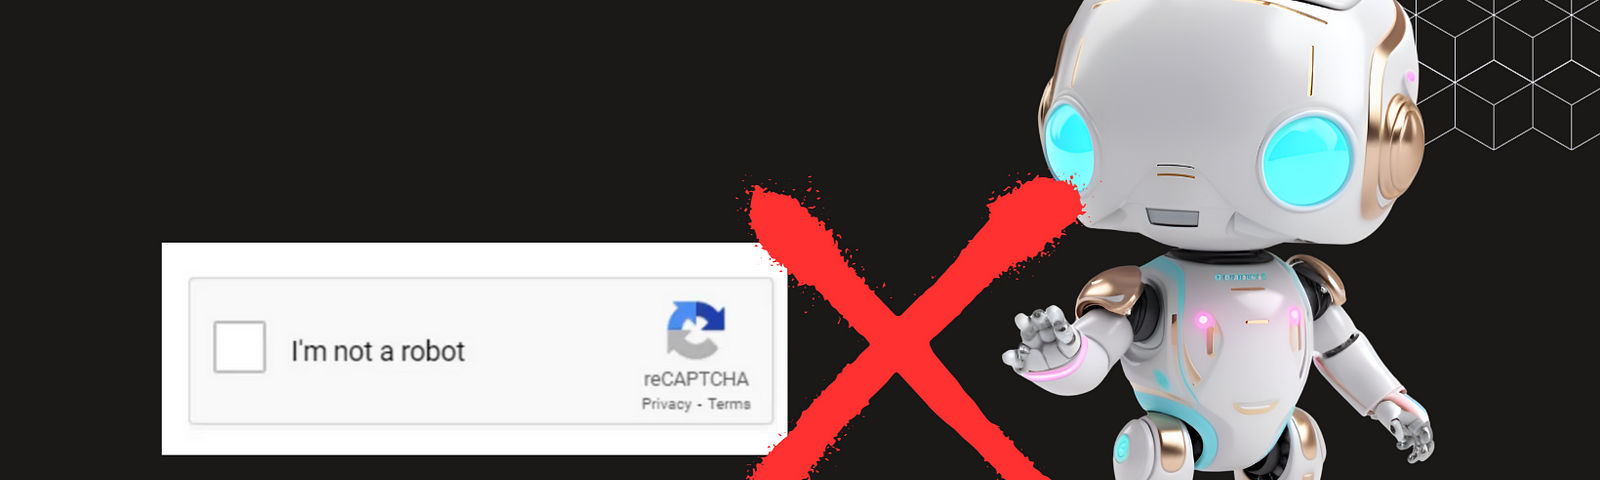 Cover Image with Bot trying to solve reCAPTCHA